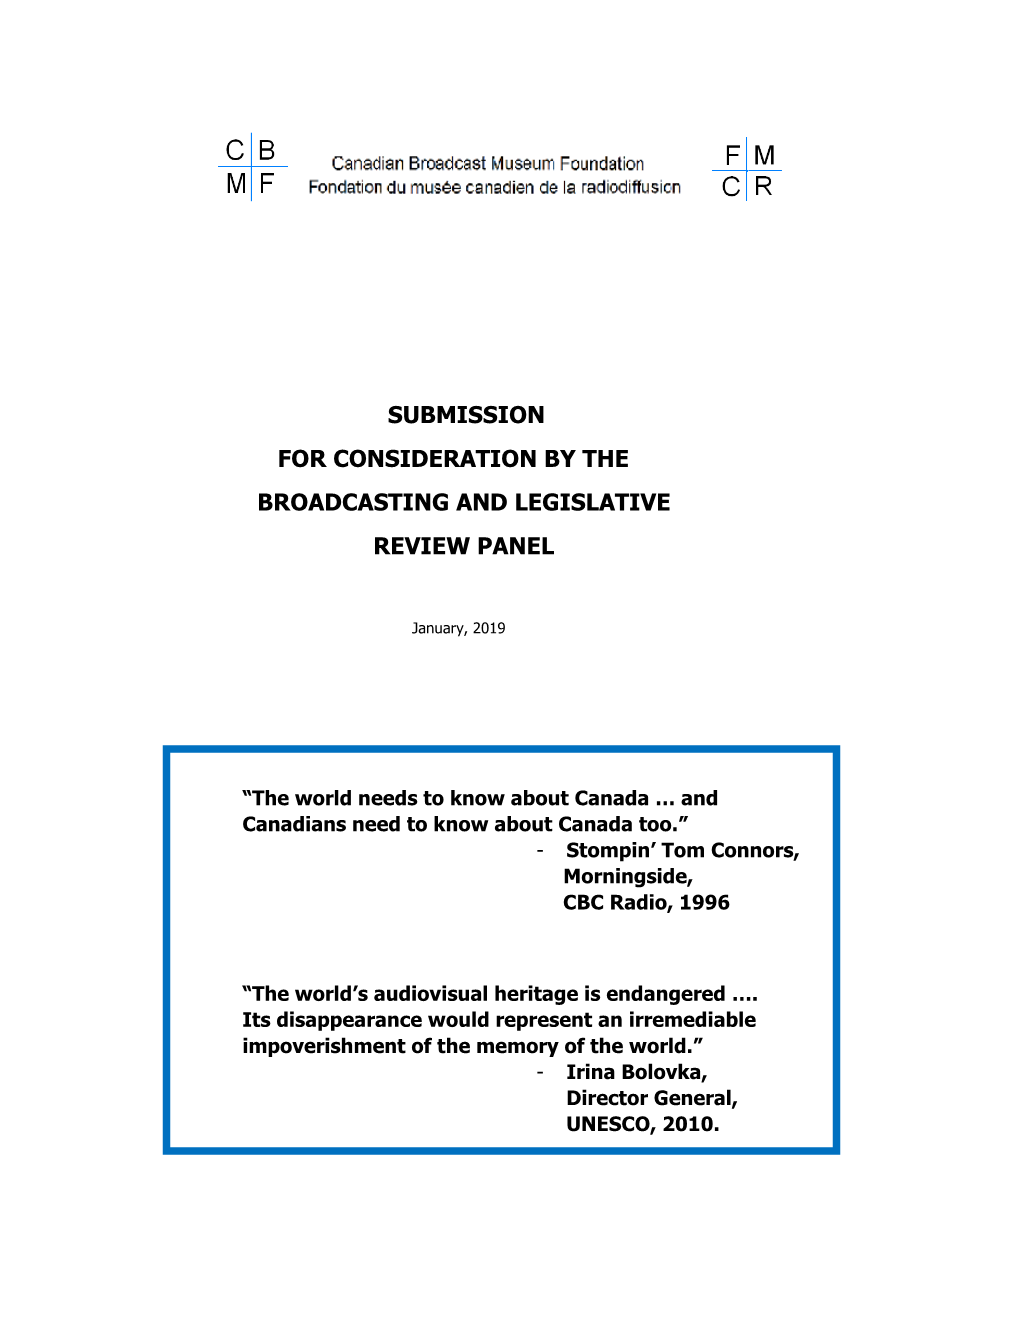 Submission for Consideration by the Broadcasting and Legislative Review Panel